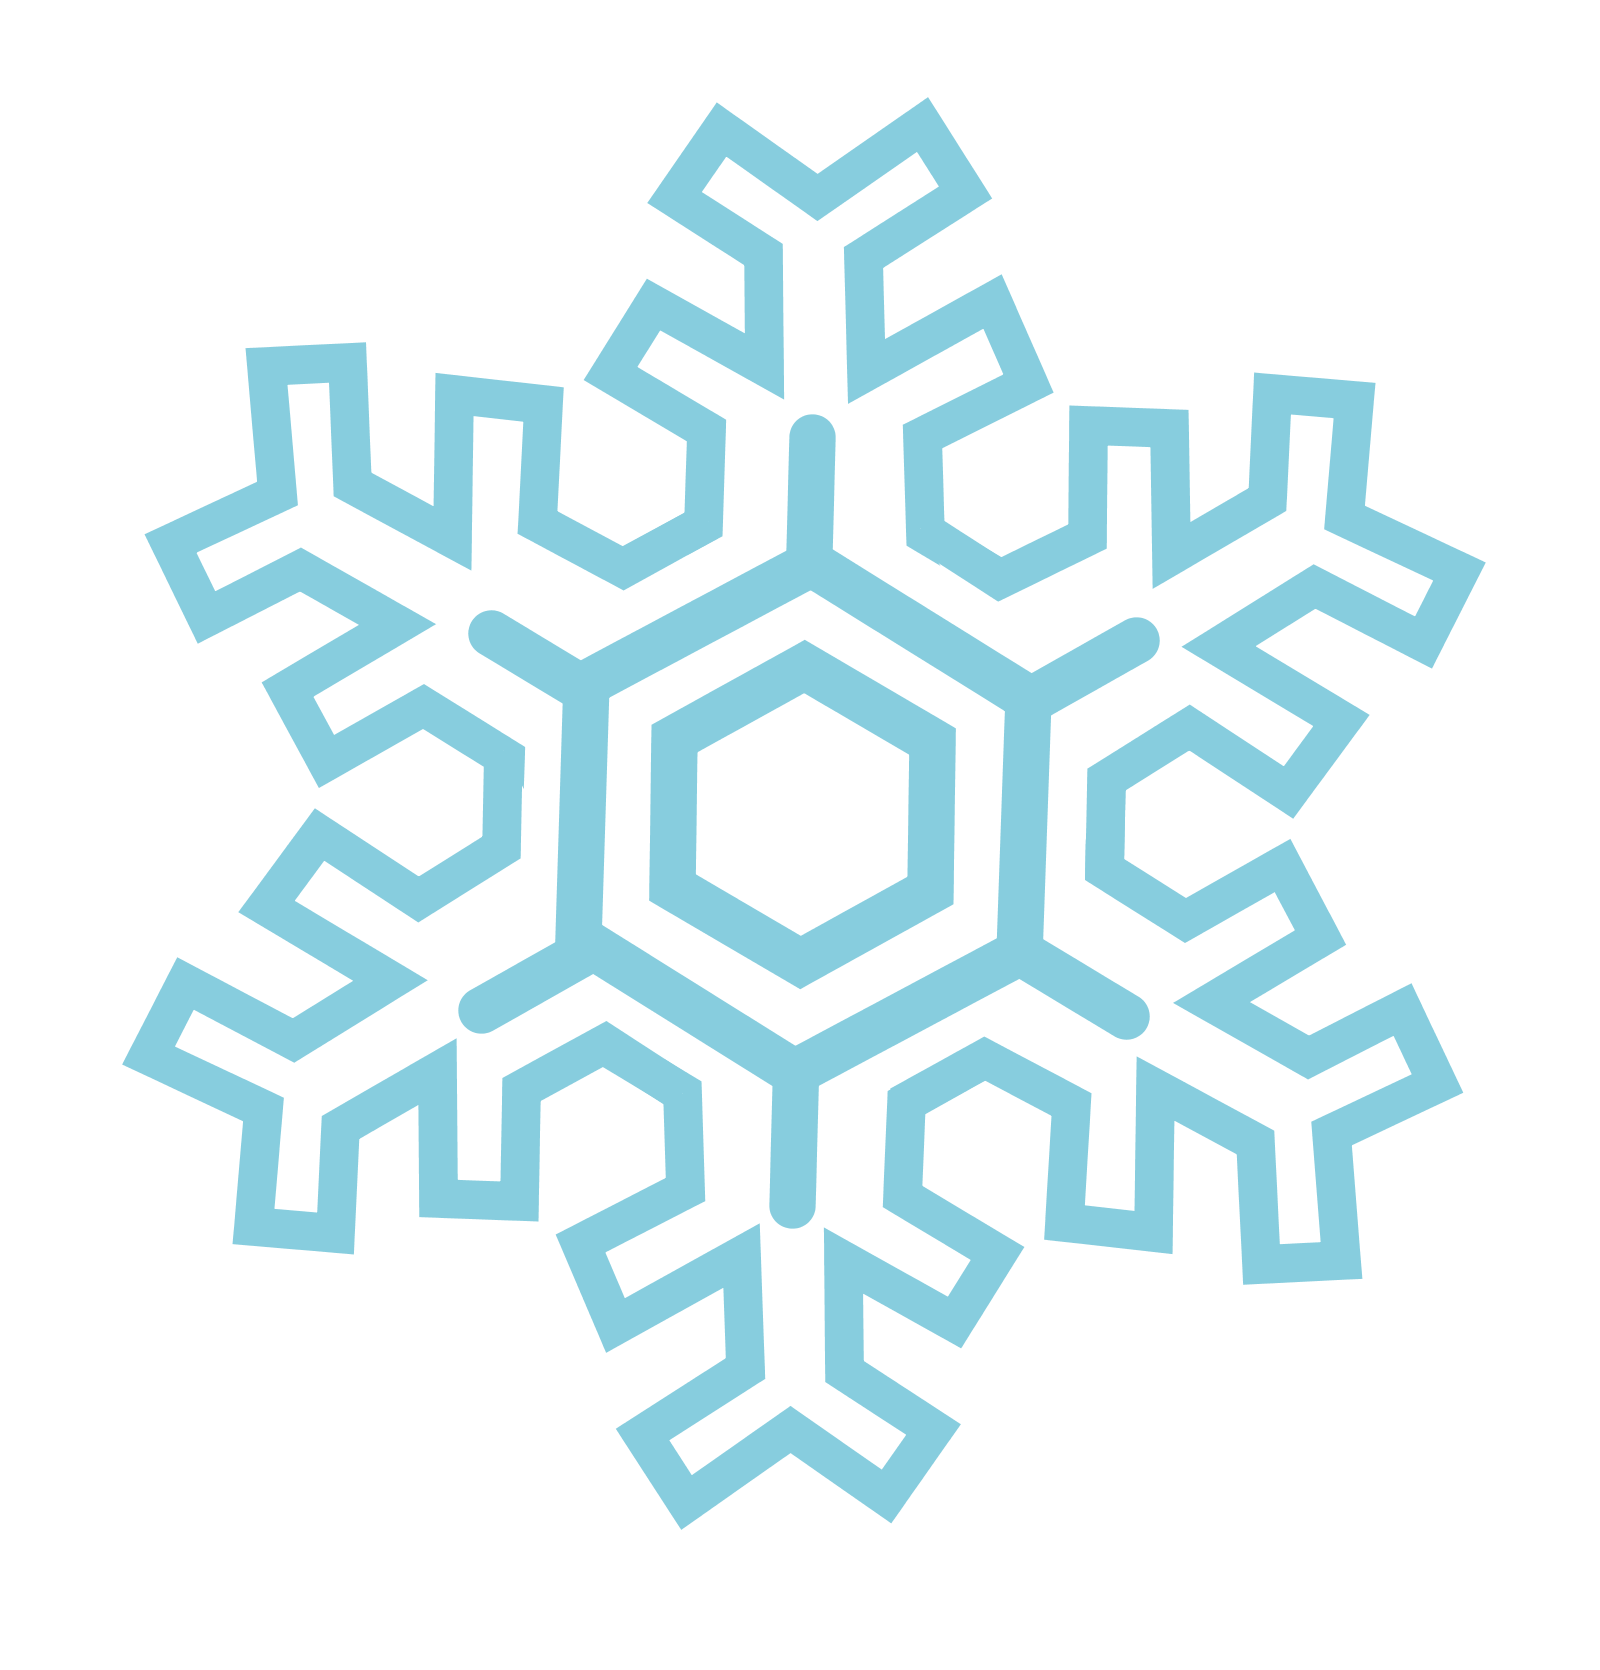 Stylized Snowflakes 20159 Download Royalty Free Vector Eps Clipart